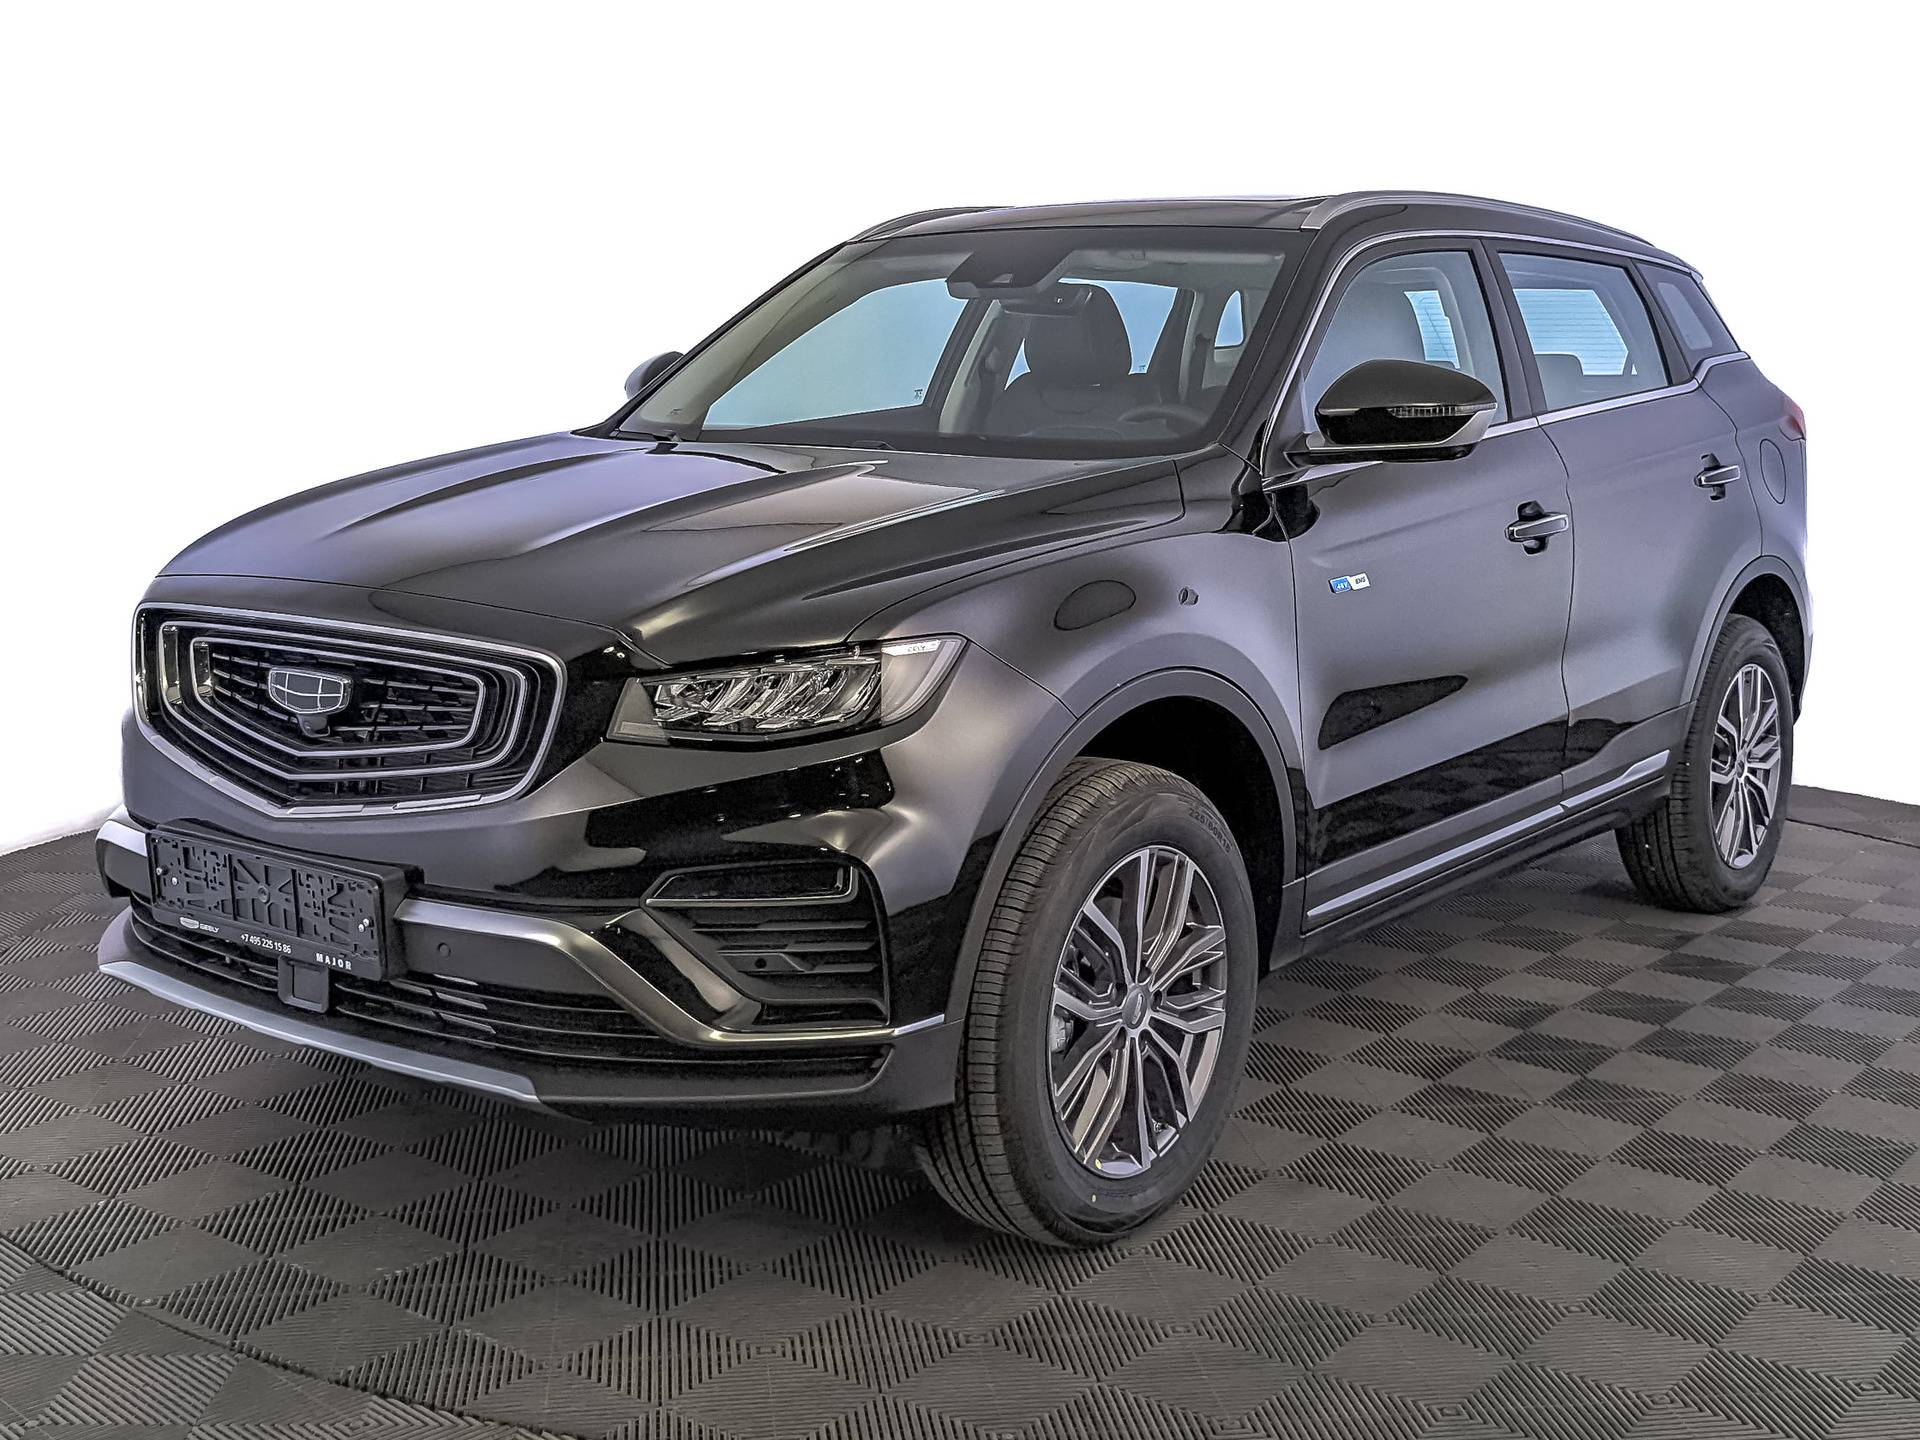 Geely Atlas Pro Flagship+ 1.5T DCT7 4WD